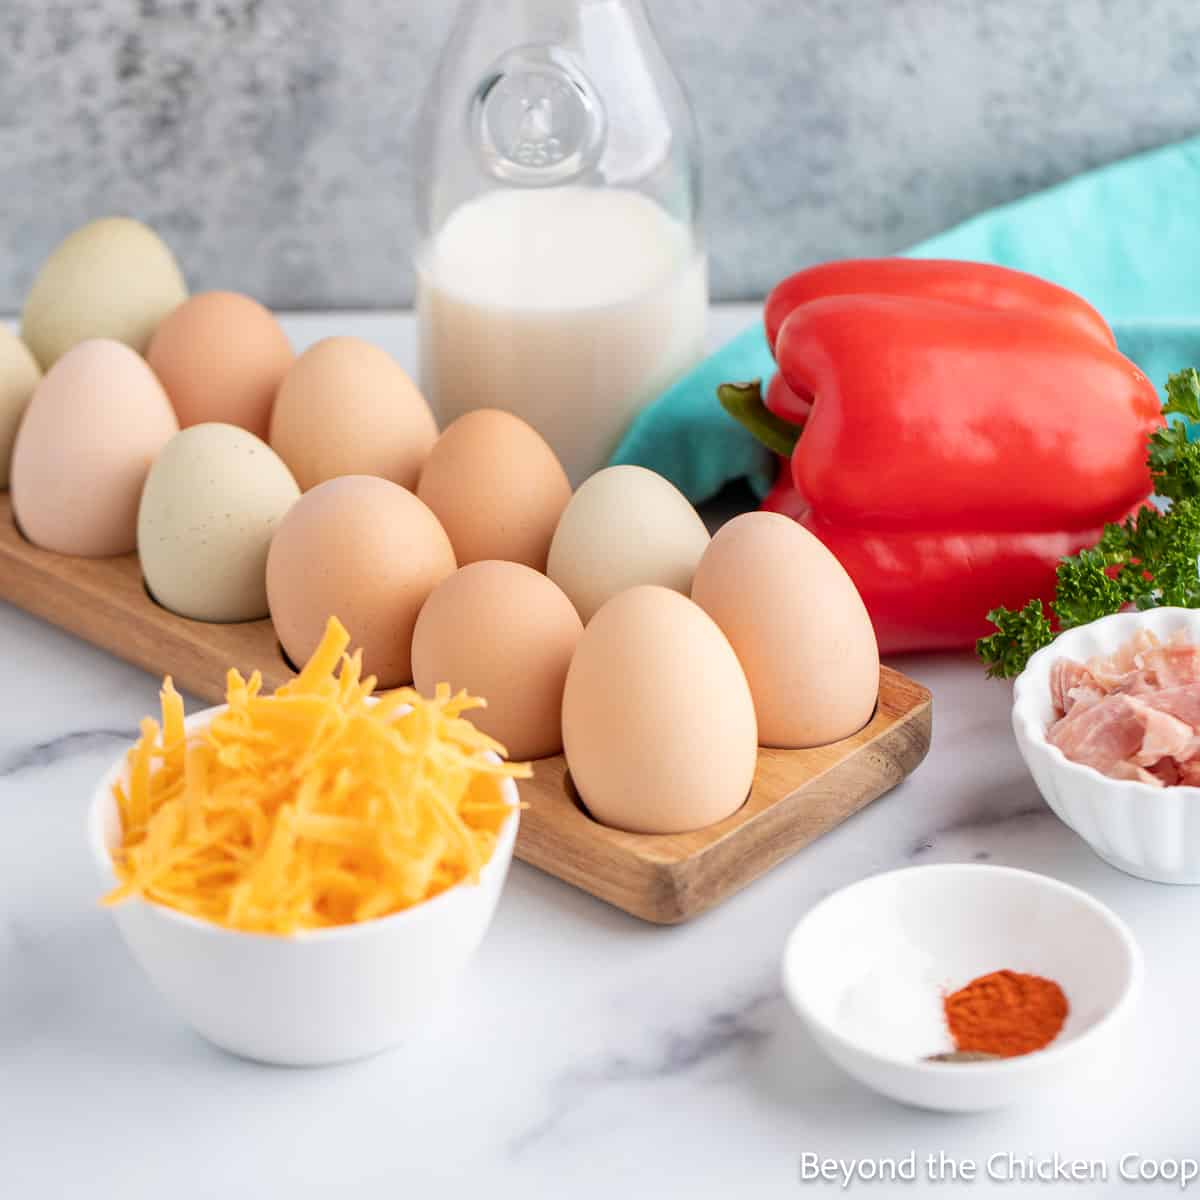 Fresh eggs next to a bowl of cheese, a bell pepper and chopped ham.